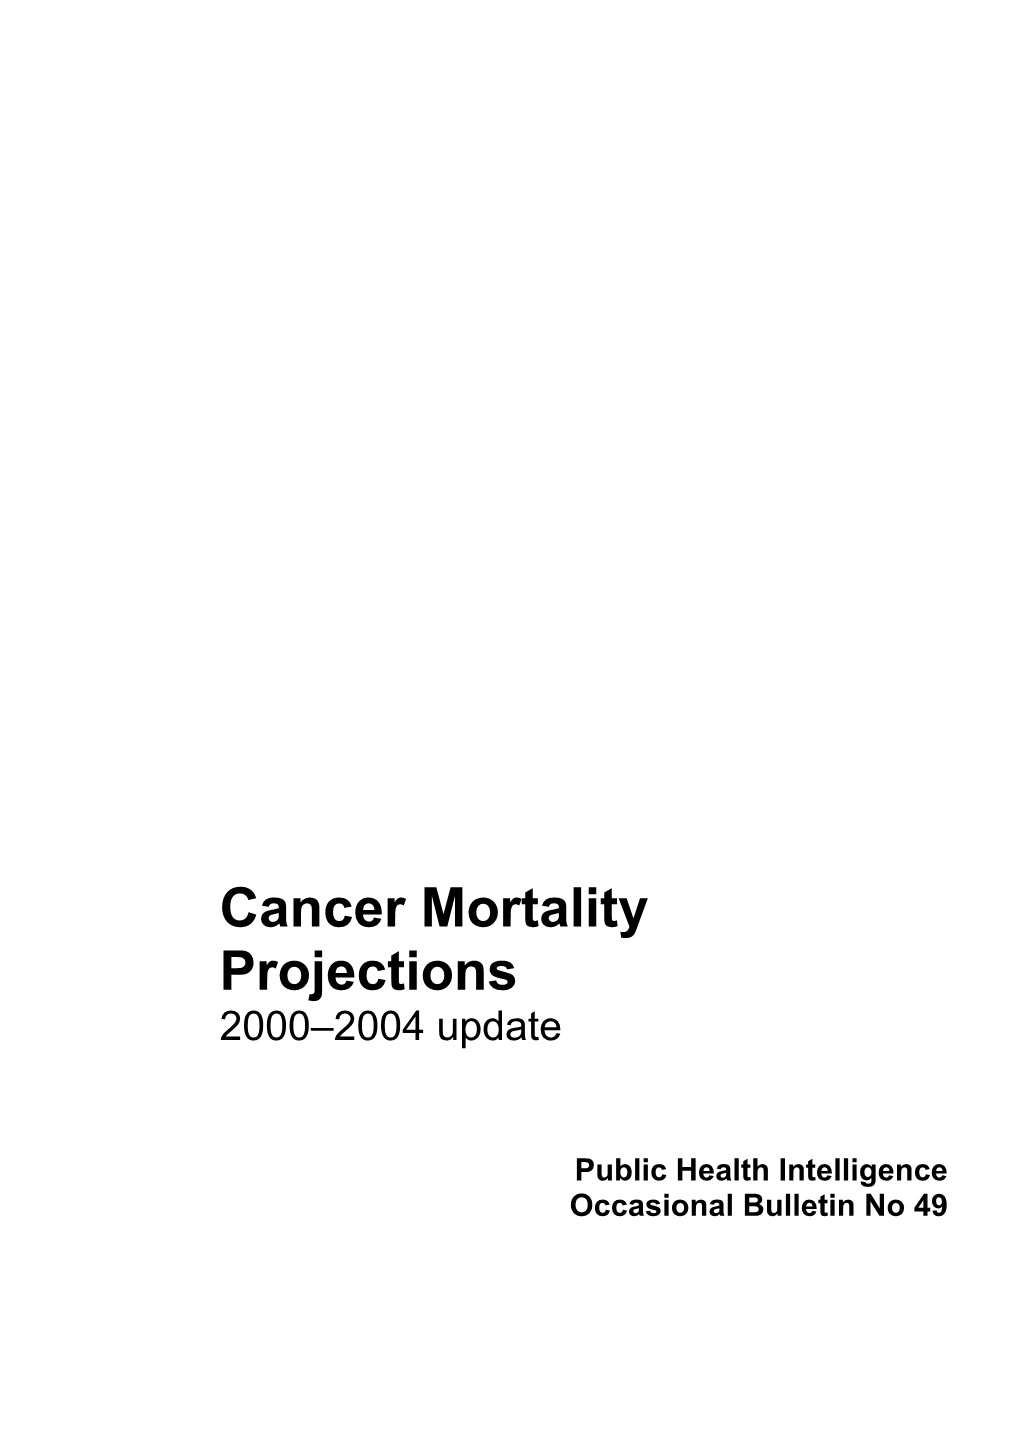 Cancer Mortality Projections